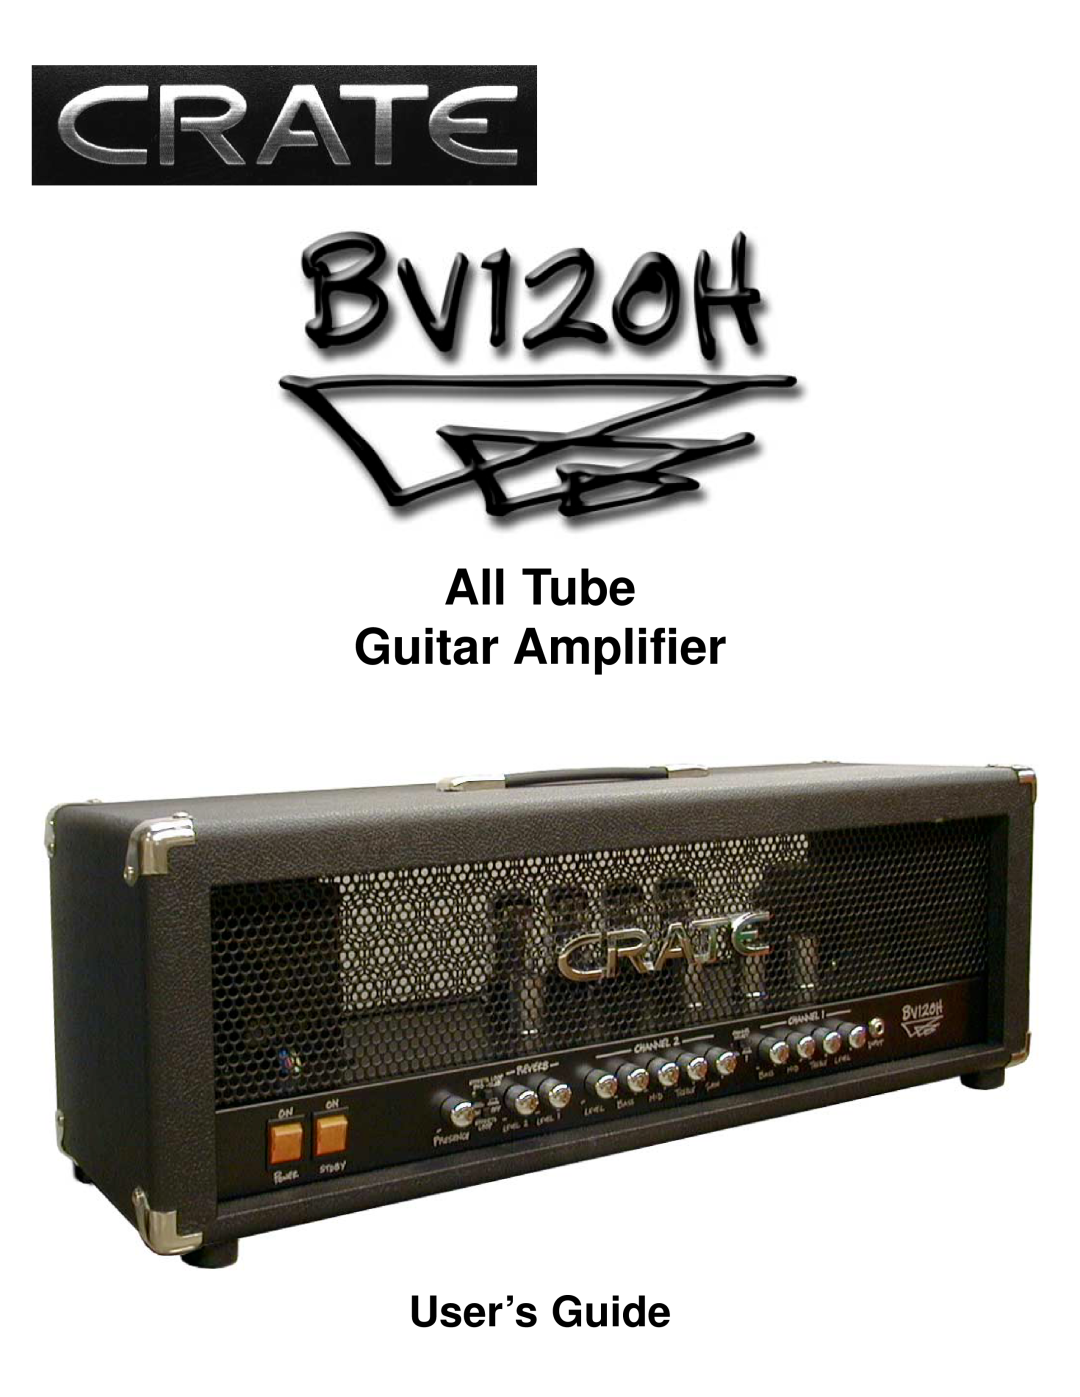 Crate Amplifiers BV120H manual All Tube Guitar Amplifier, User’s Guide 